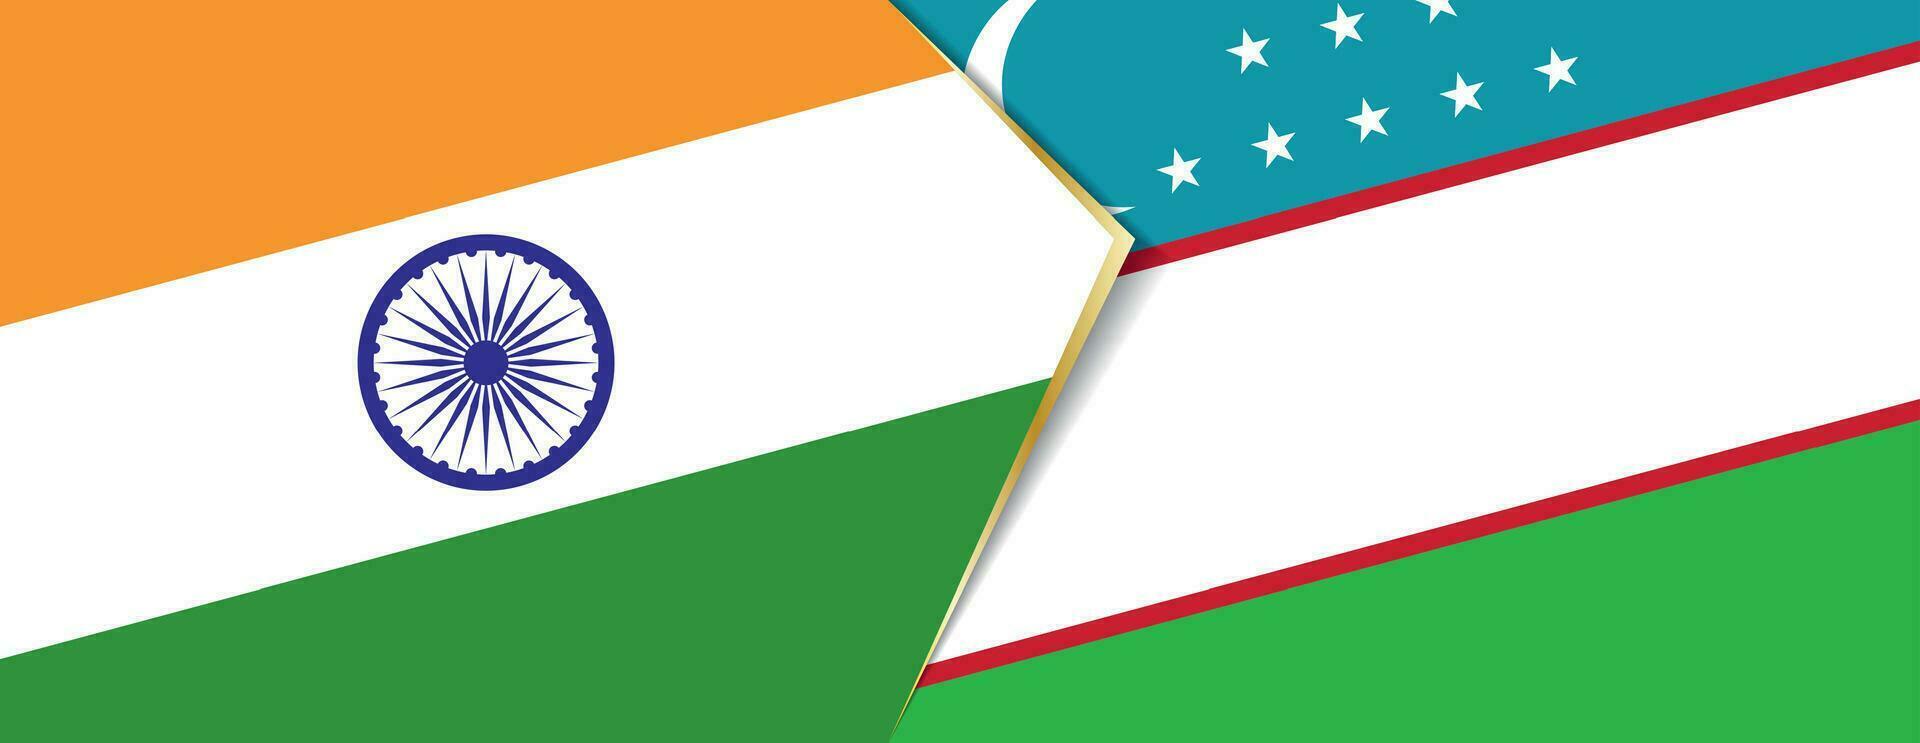 India and Uzbekistan flags, two vector flags.